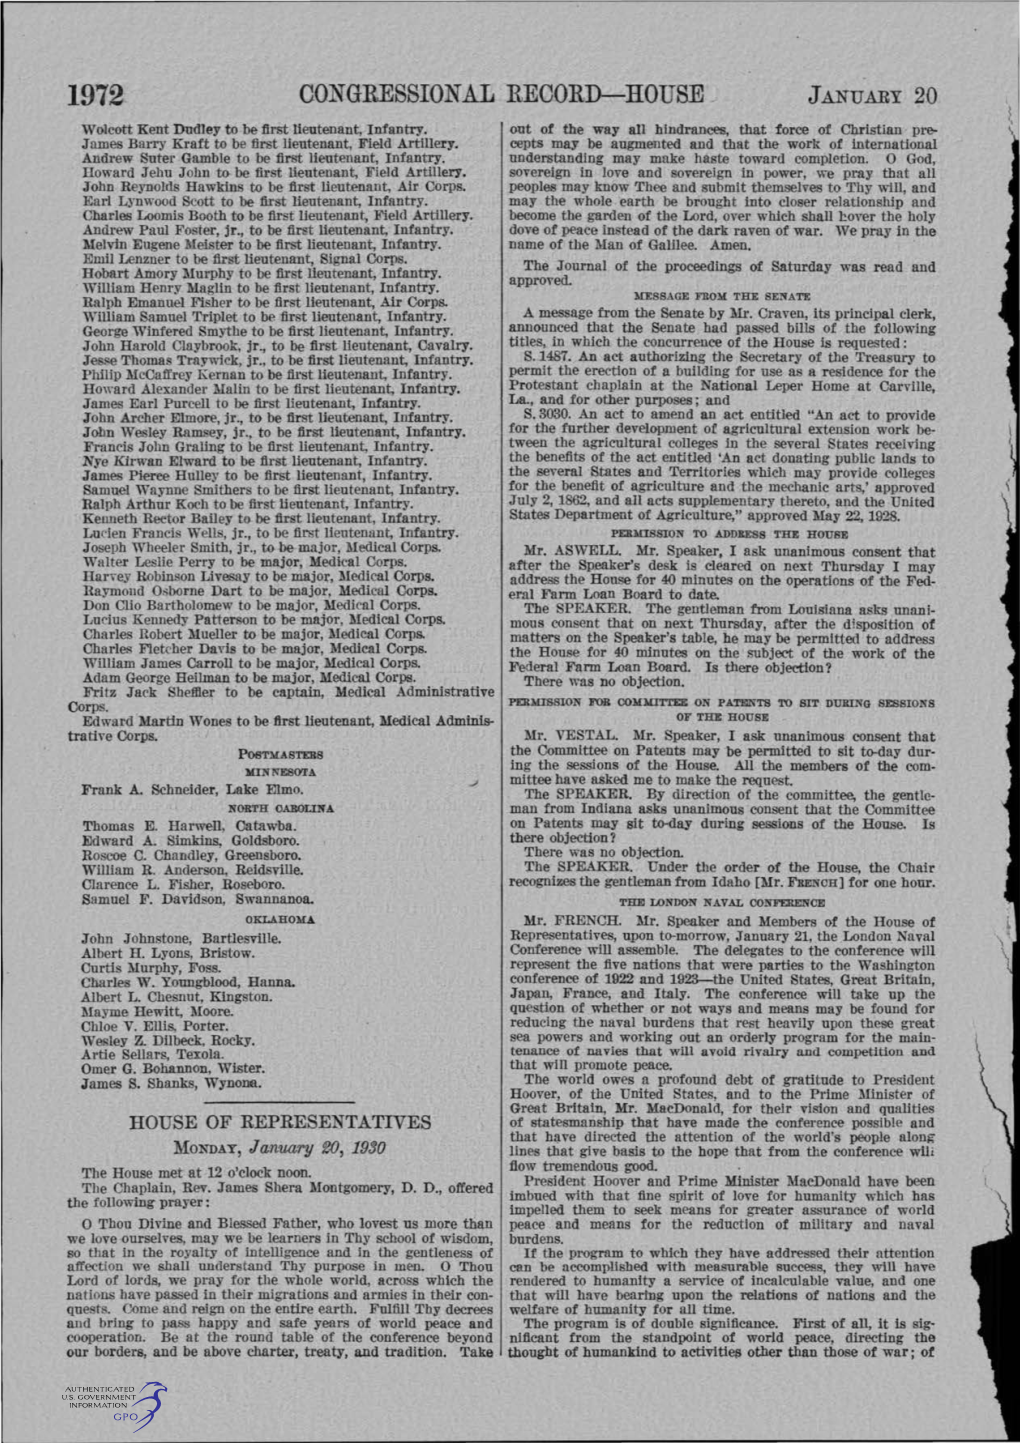 CONGRESSIONAL RECORD-HOUSE JANUARY 20 Wolcott Kent Dudley to Be First Lieutenant, Infantry